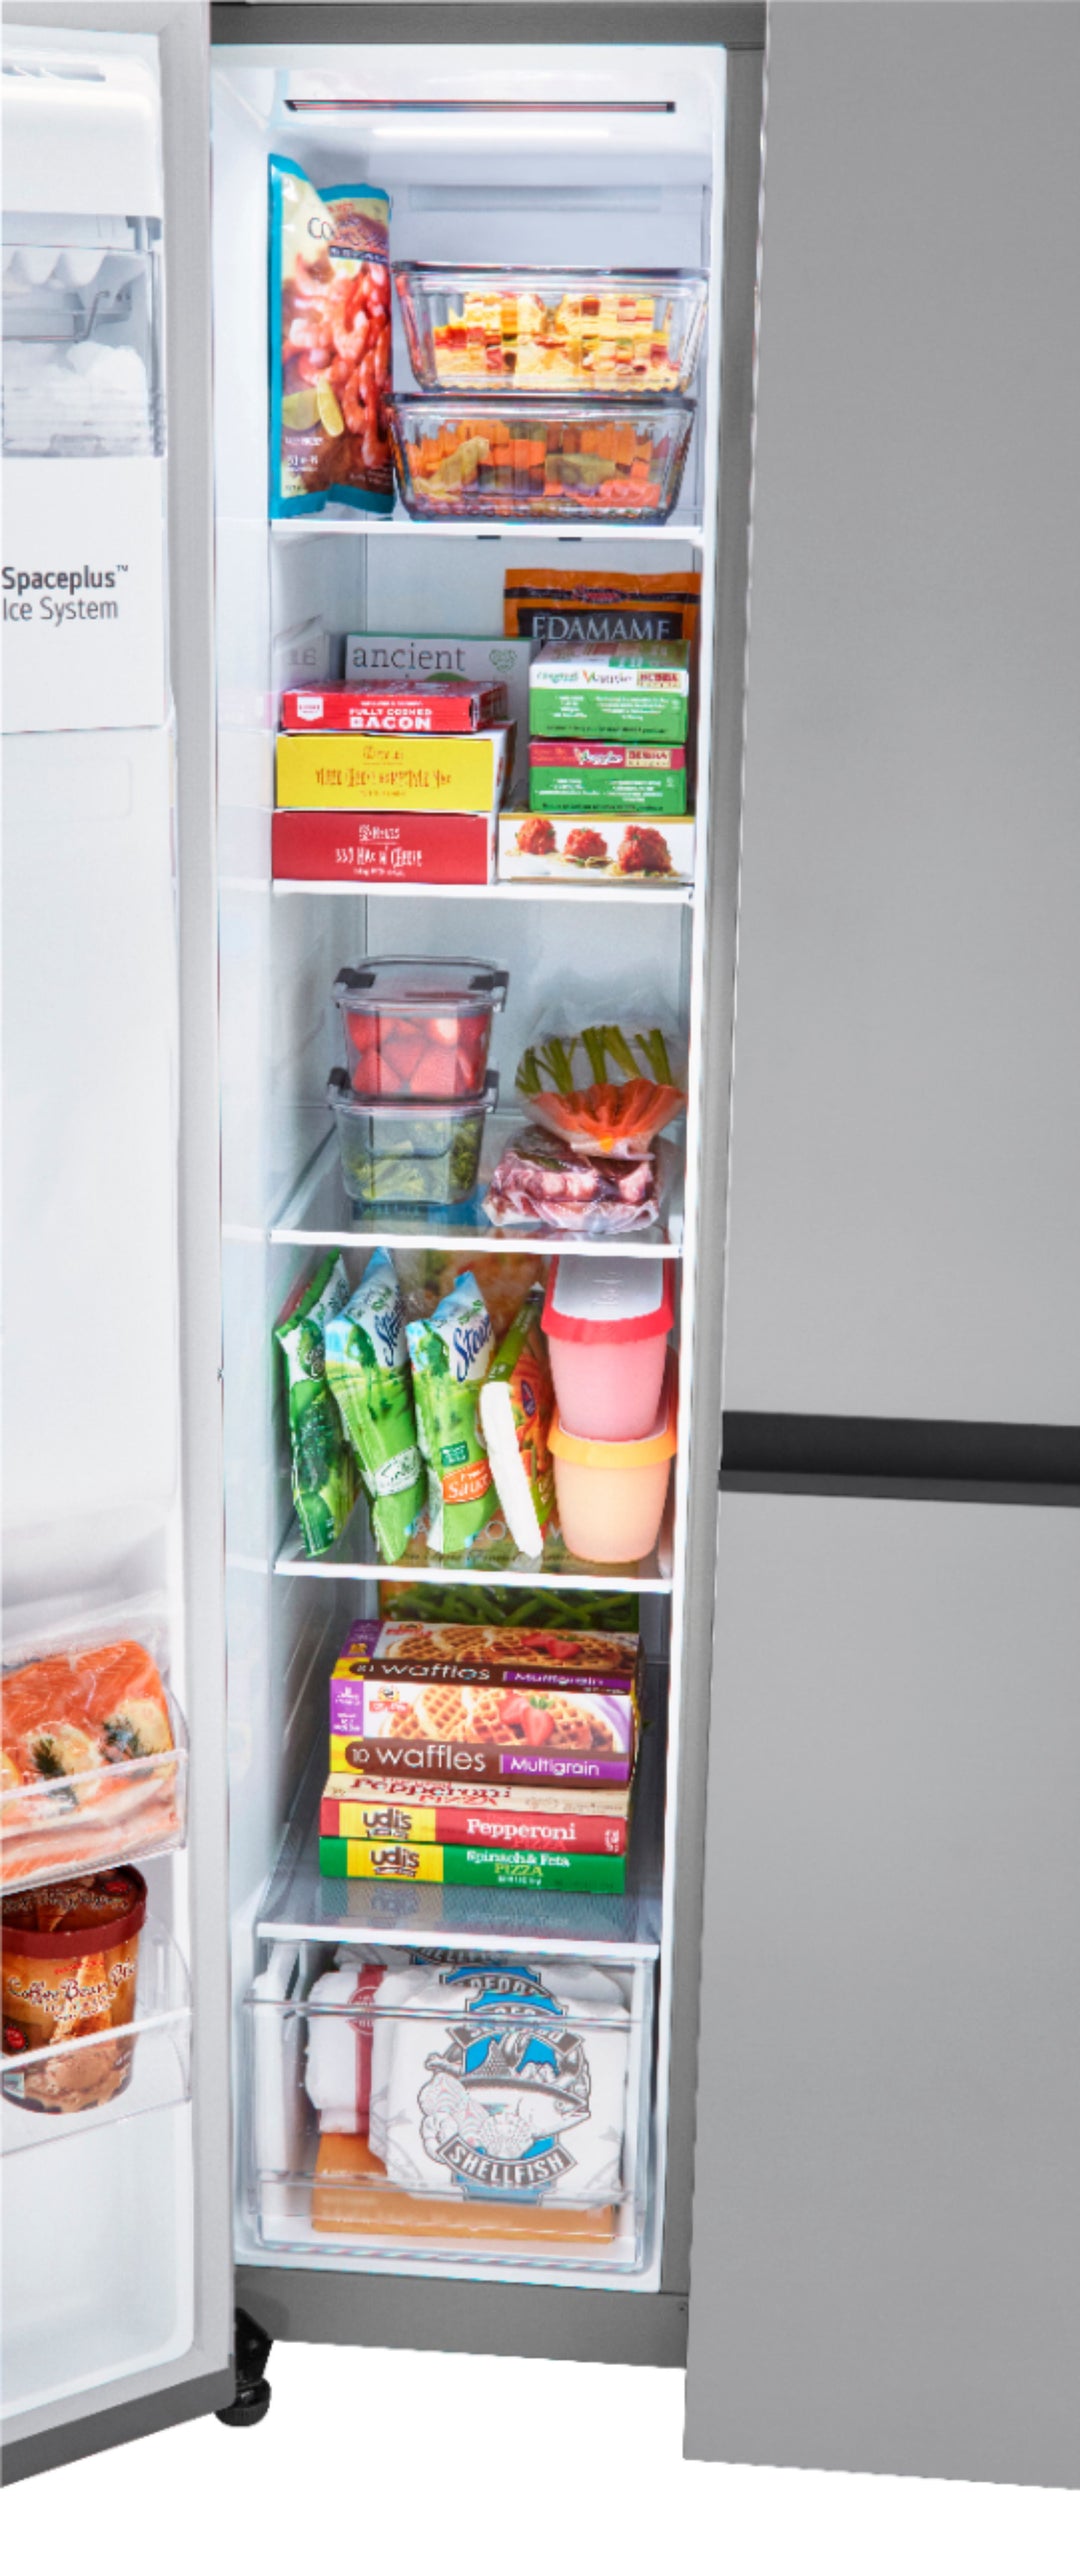 LG - 27.2 Cu. Ft. Side-by-Side Smart Refrigerator with SpacePlus Ice - Stainless steel_17